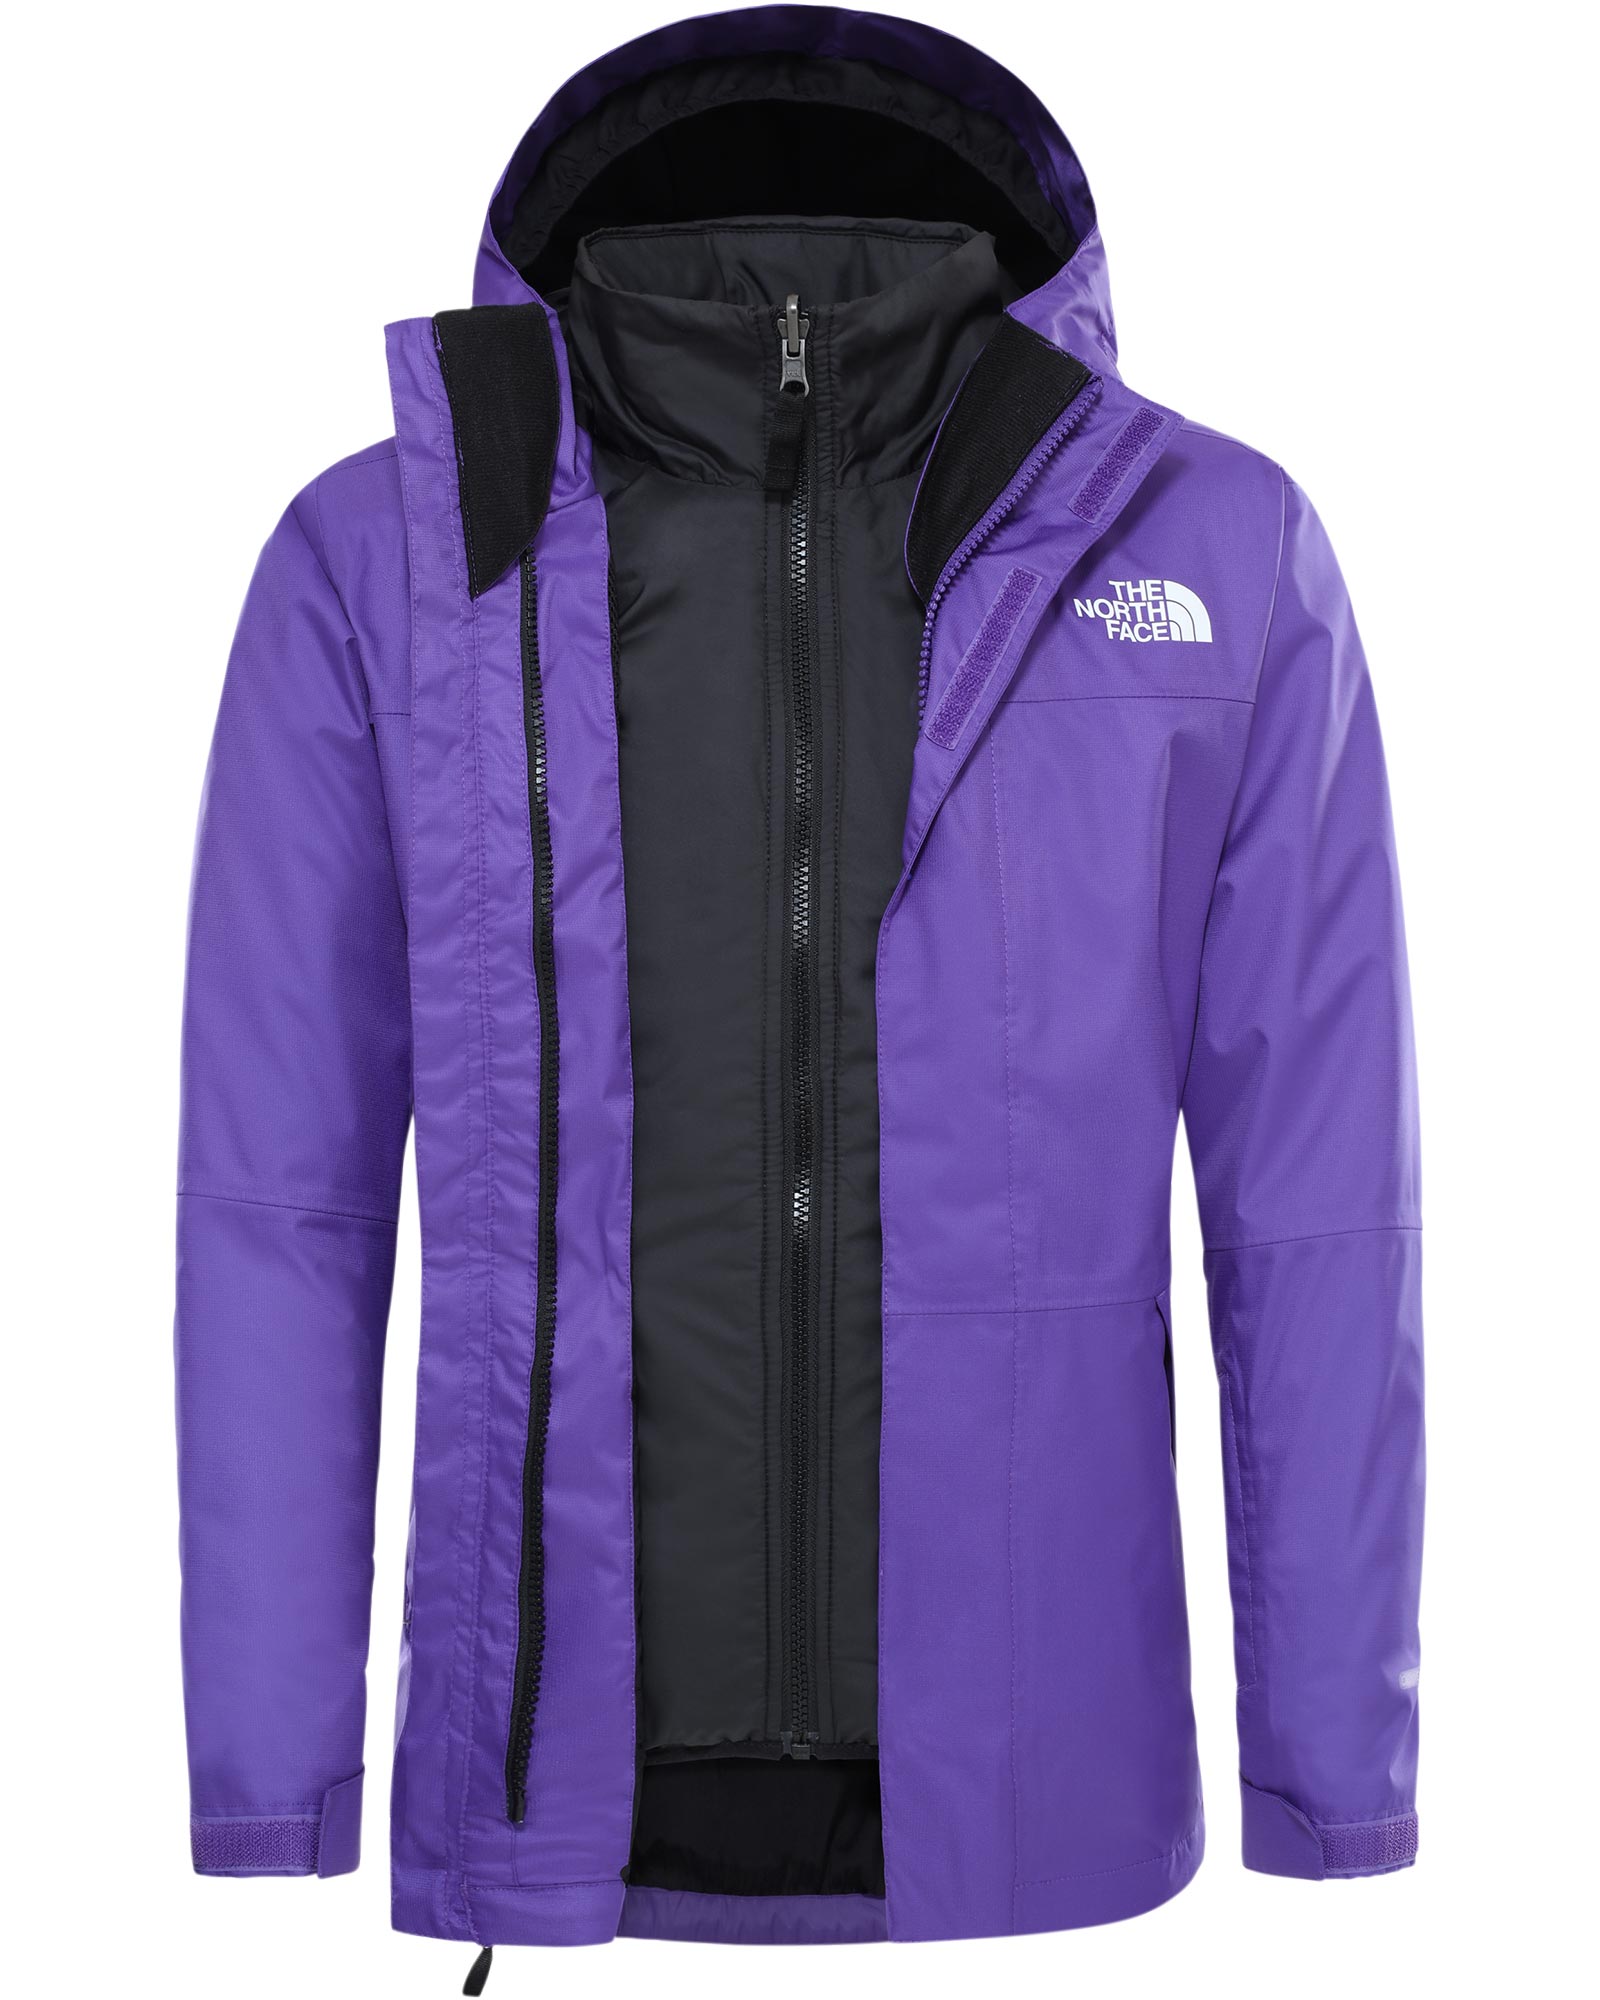 The North Face Freedom Triclimate Girls’ Jacket - Peak Purple L